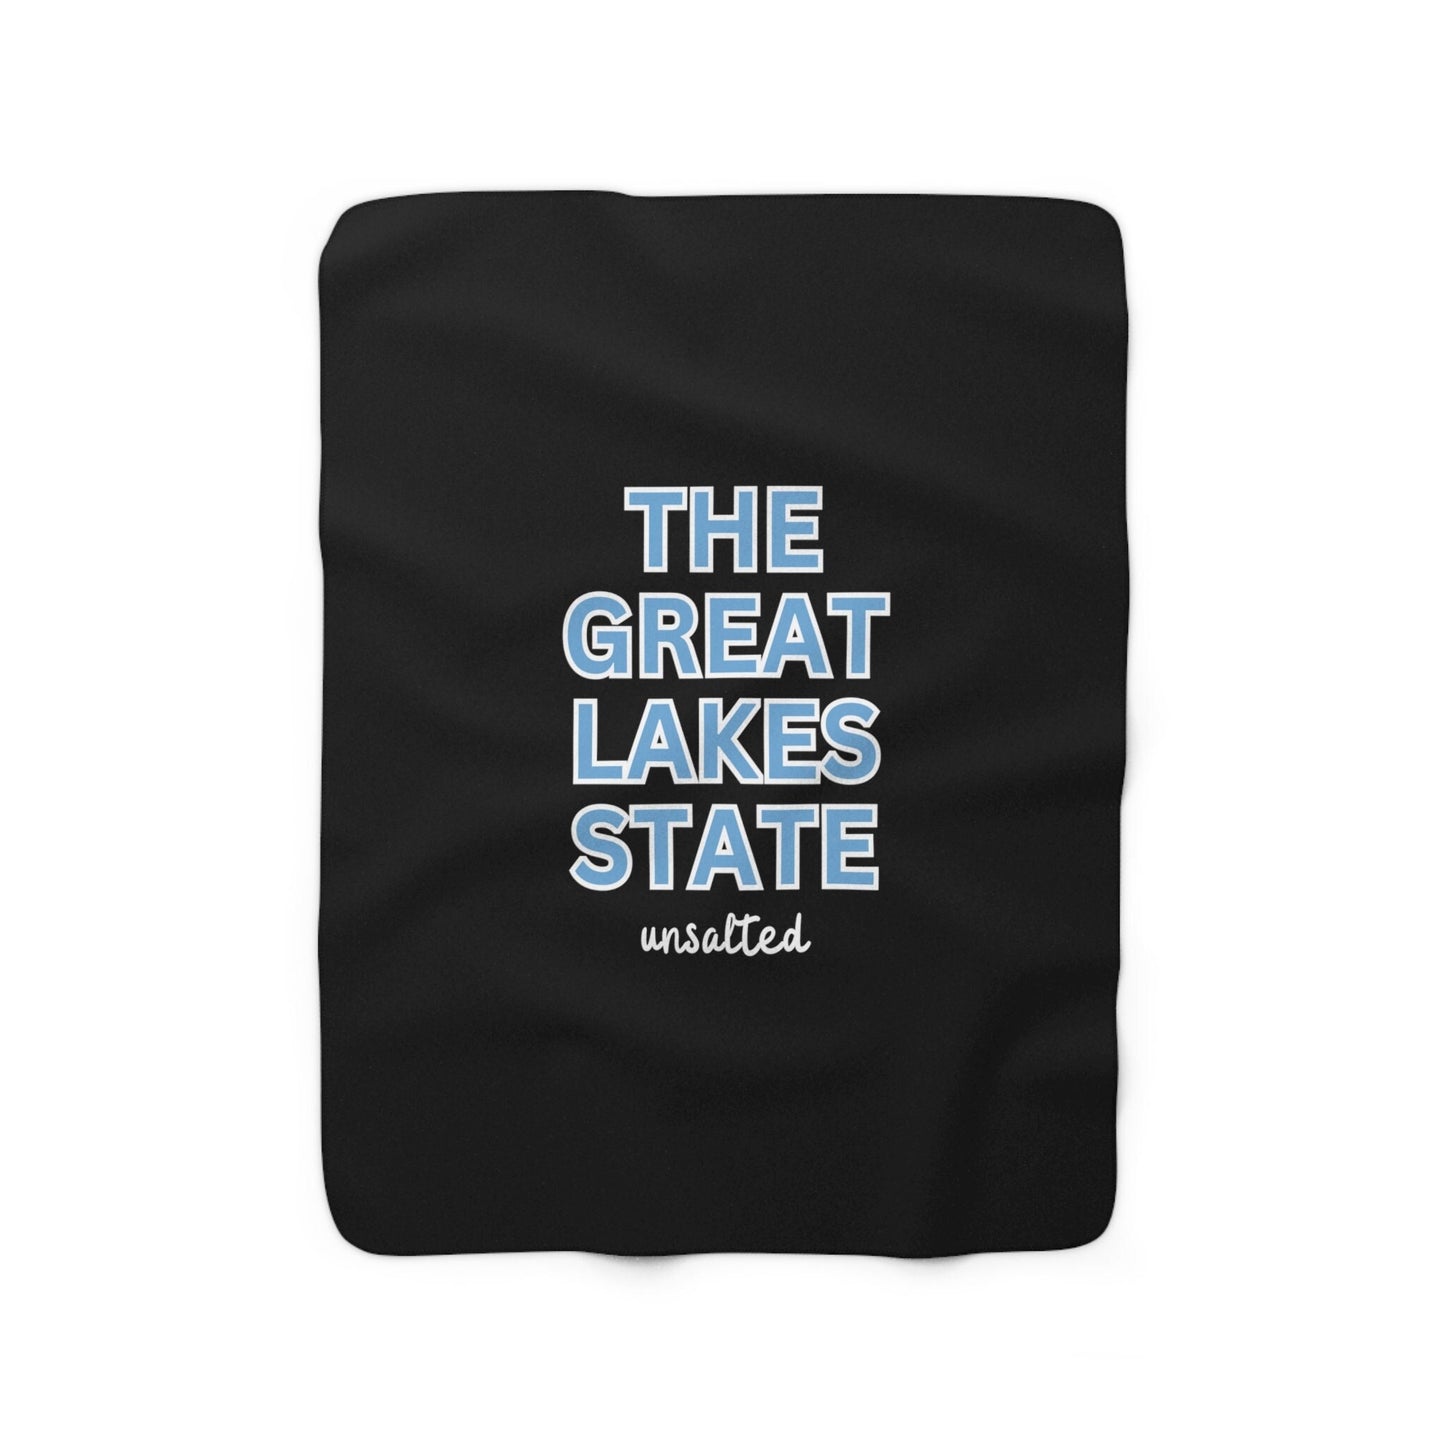 The Great Lakes State, Unsalted, Michigan, Michigander Sherpa Fleece Blanket